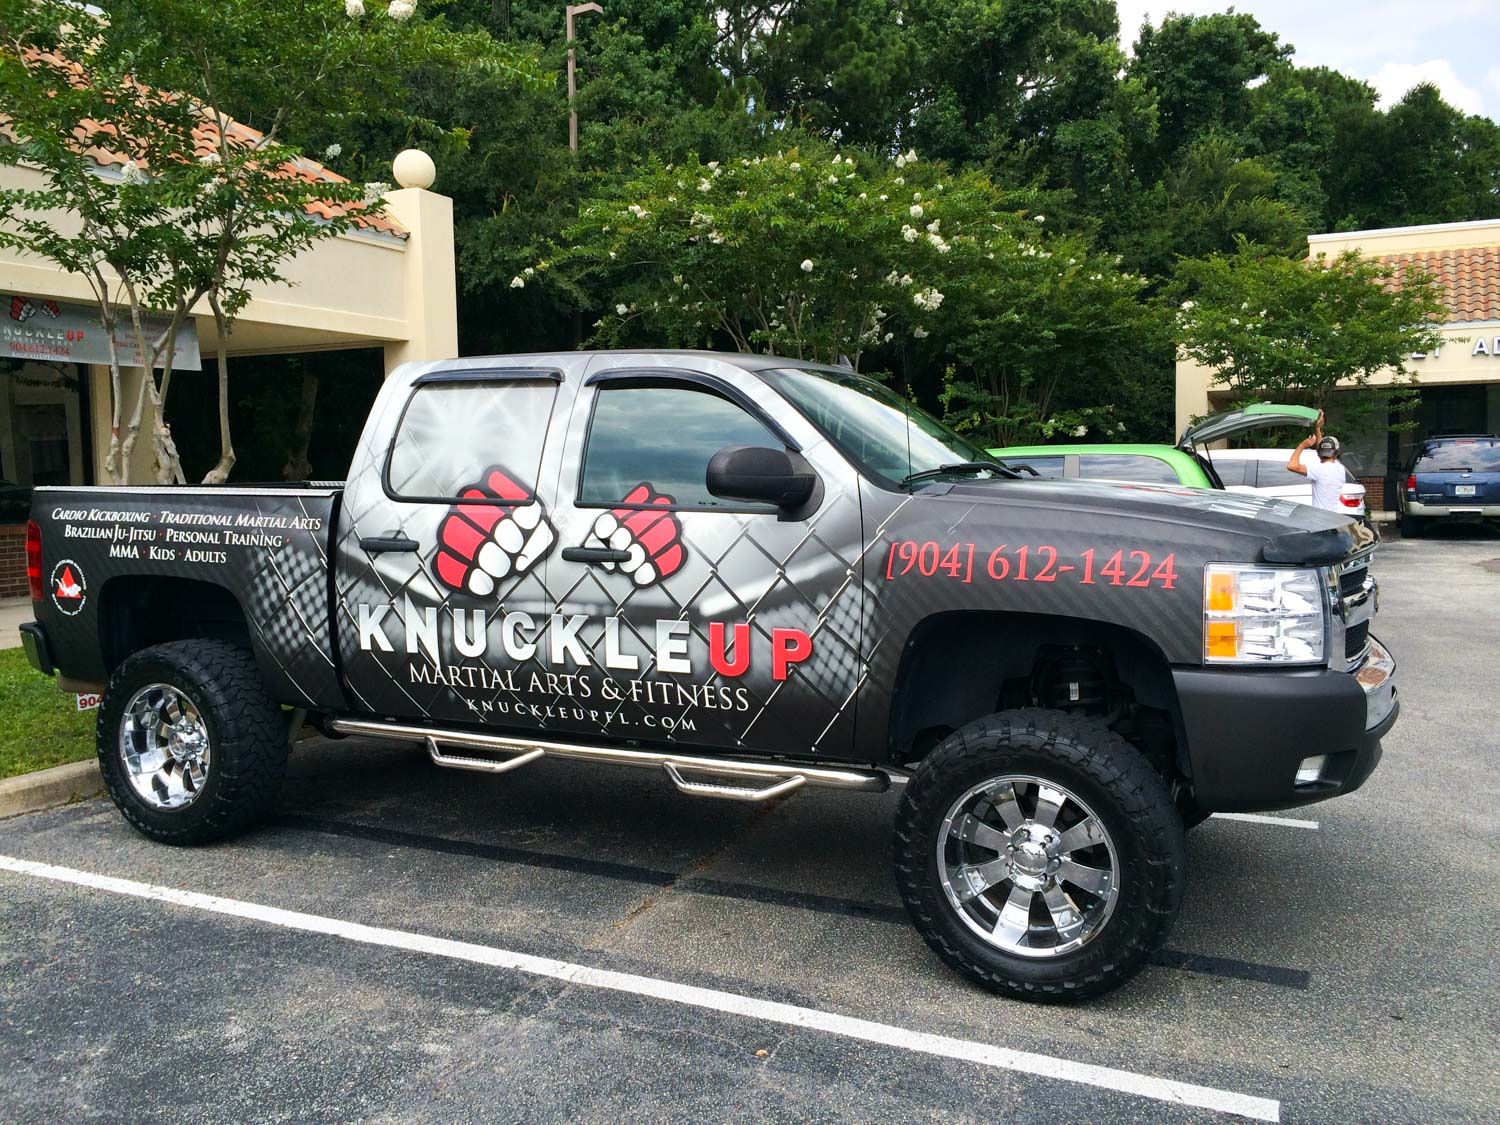 Knuckle Up Vehicle Wrap